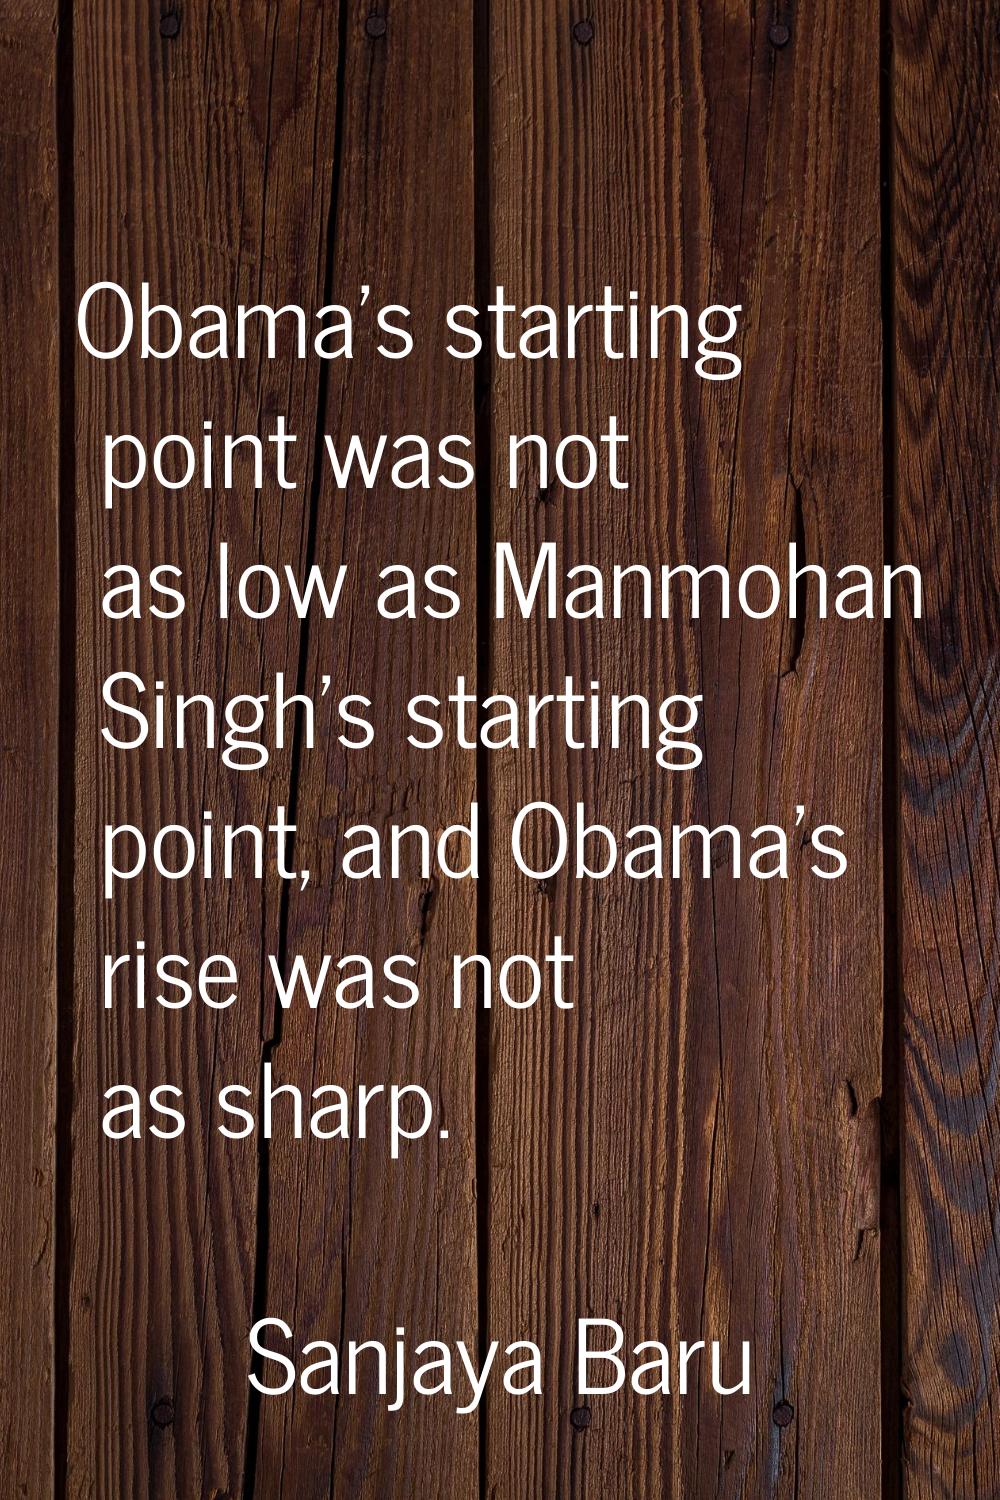 Obama's starting point was not as low as Manmohan Singh's starting point, and Obama's rise was not 